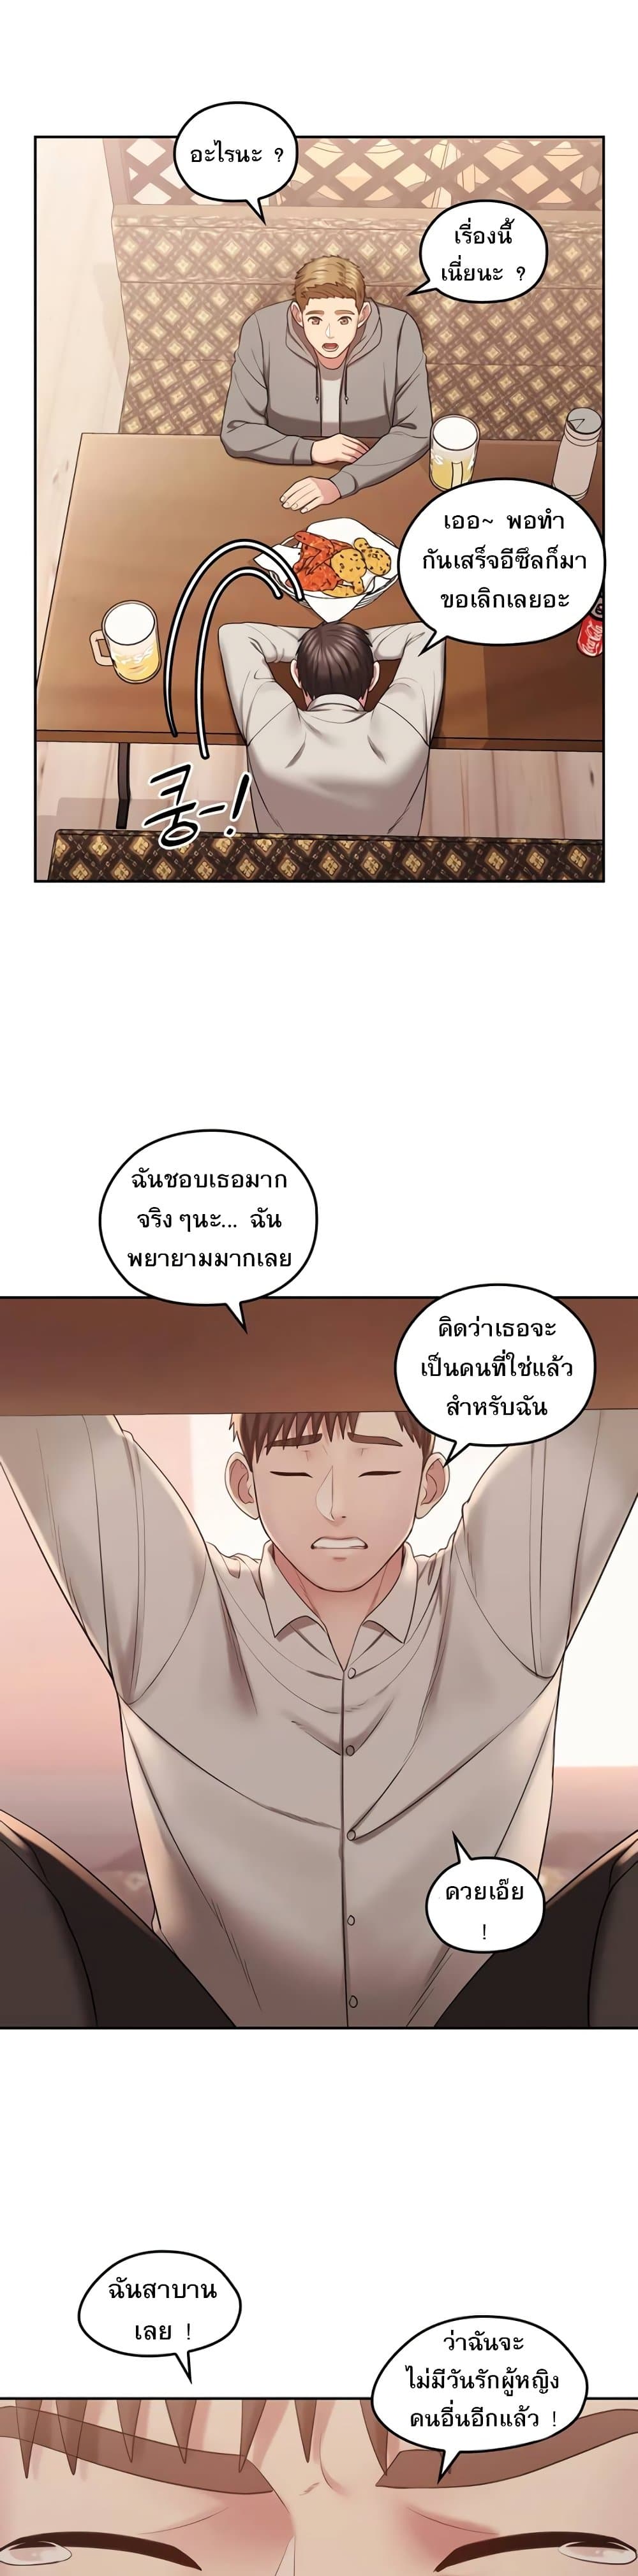 Sexual Consulting 2 ภาพที่ 14